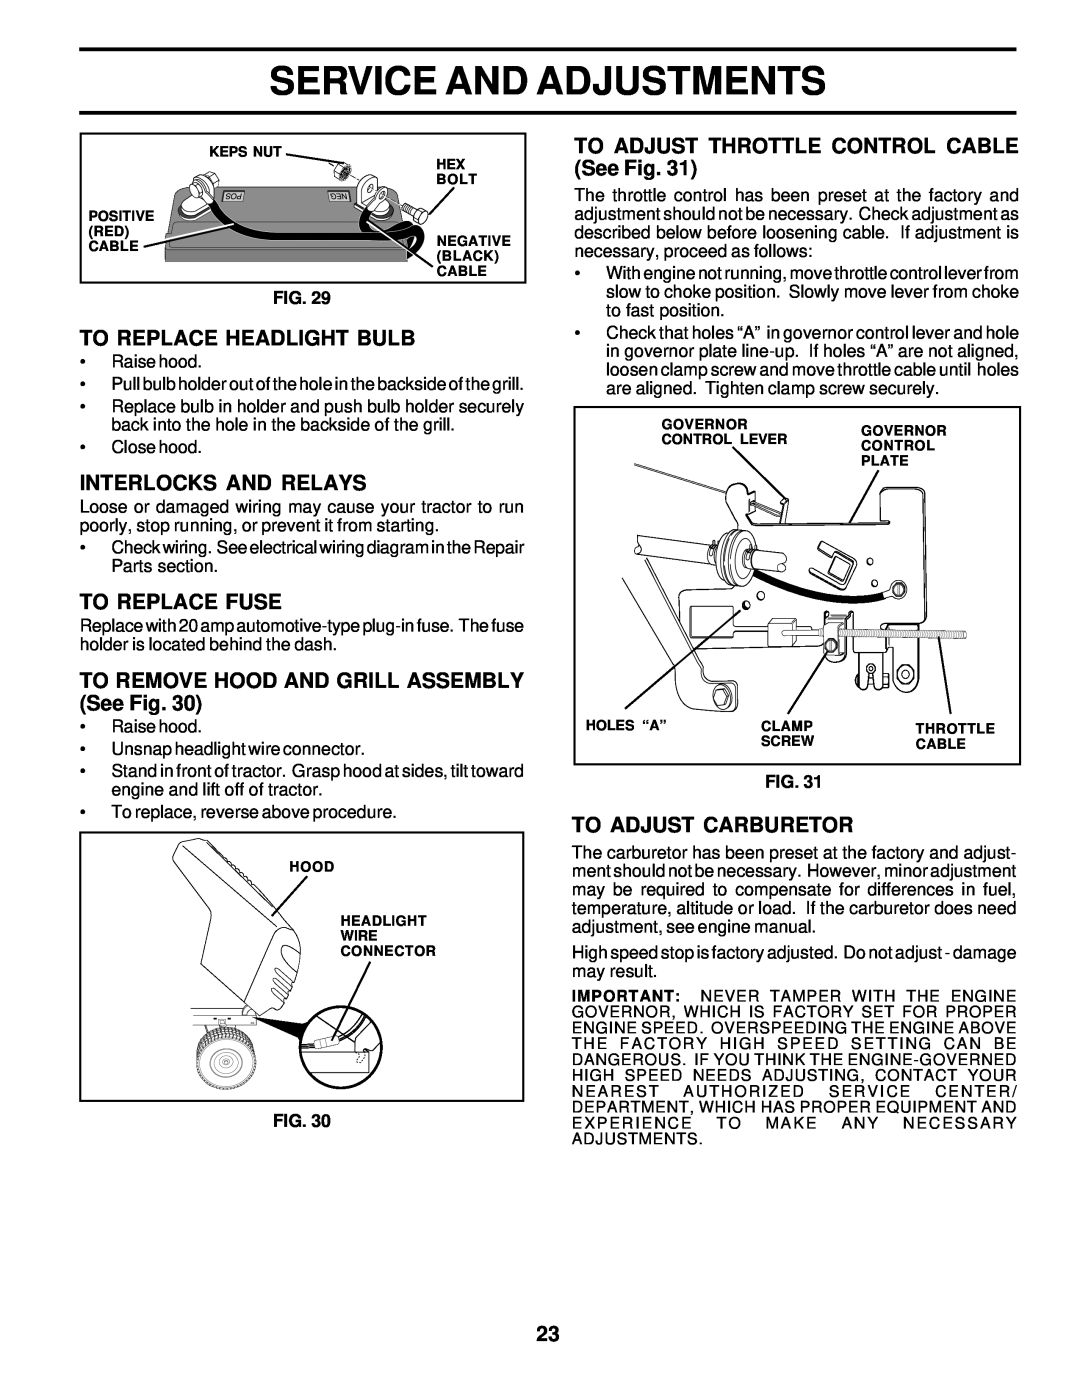 Poulan PO165H42A owner manual To Replace Headlight Bulb, Interlocks And Relays, To Replace Fuse, To Adjust Carburetor 